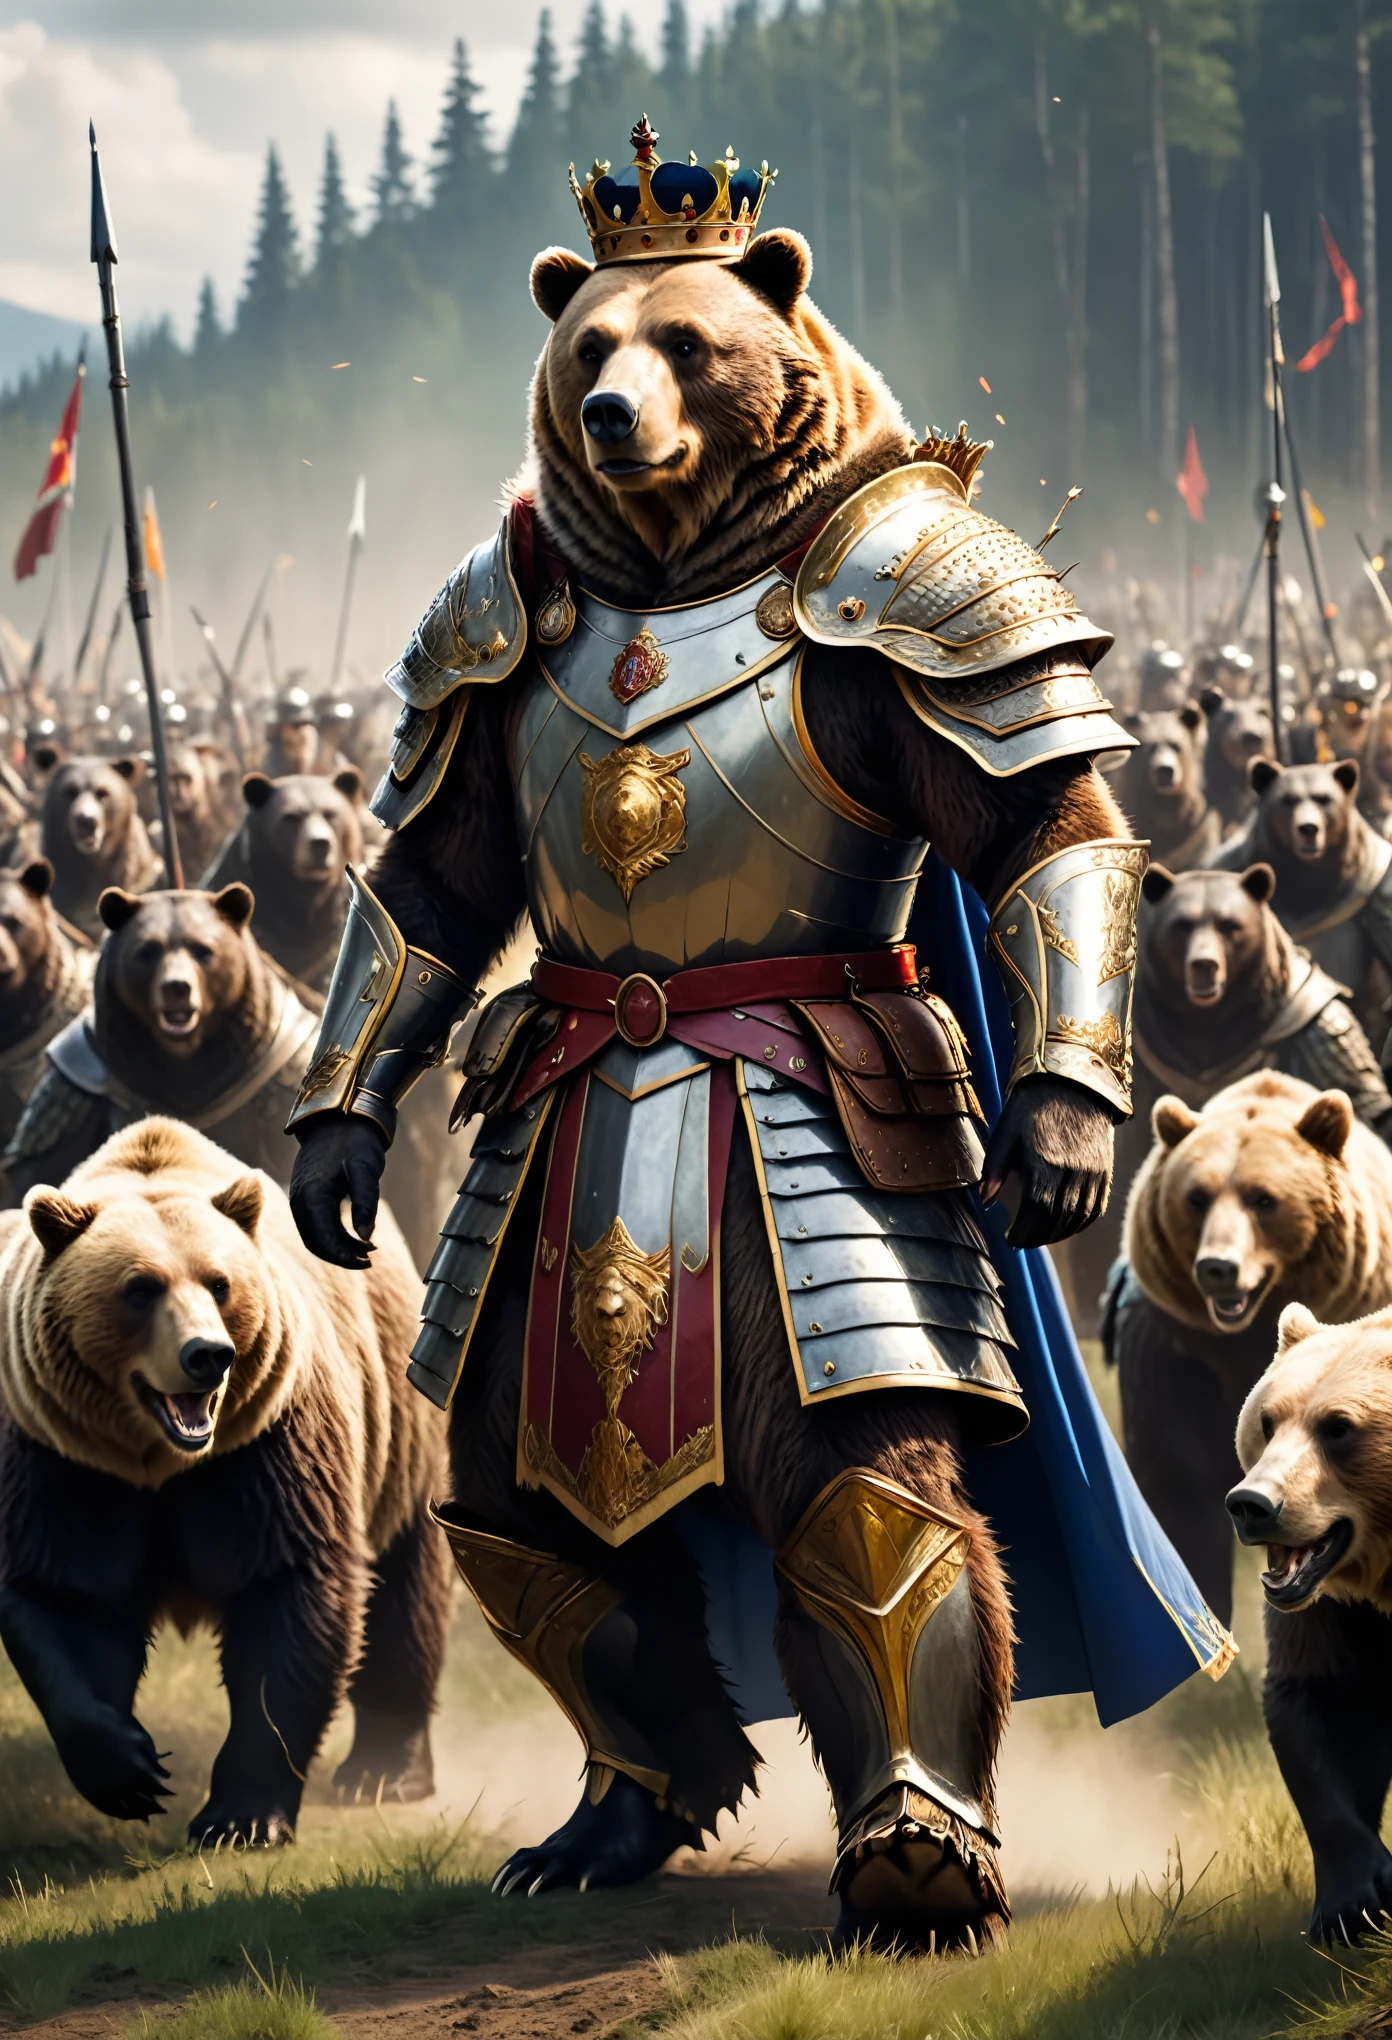 a bear king in regal armour wearing a royal coat leading an army of animals into battle on a battlefield